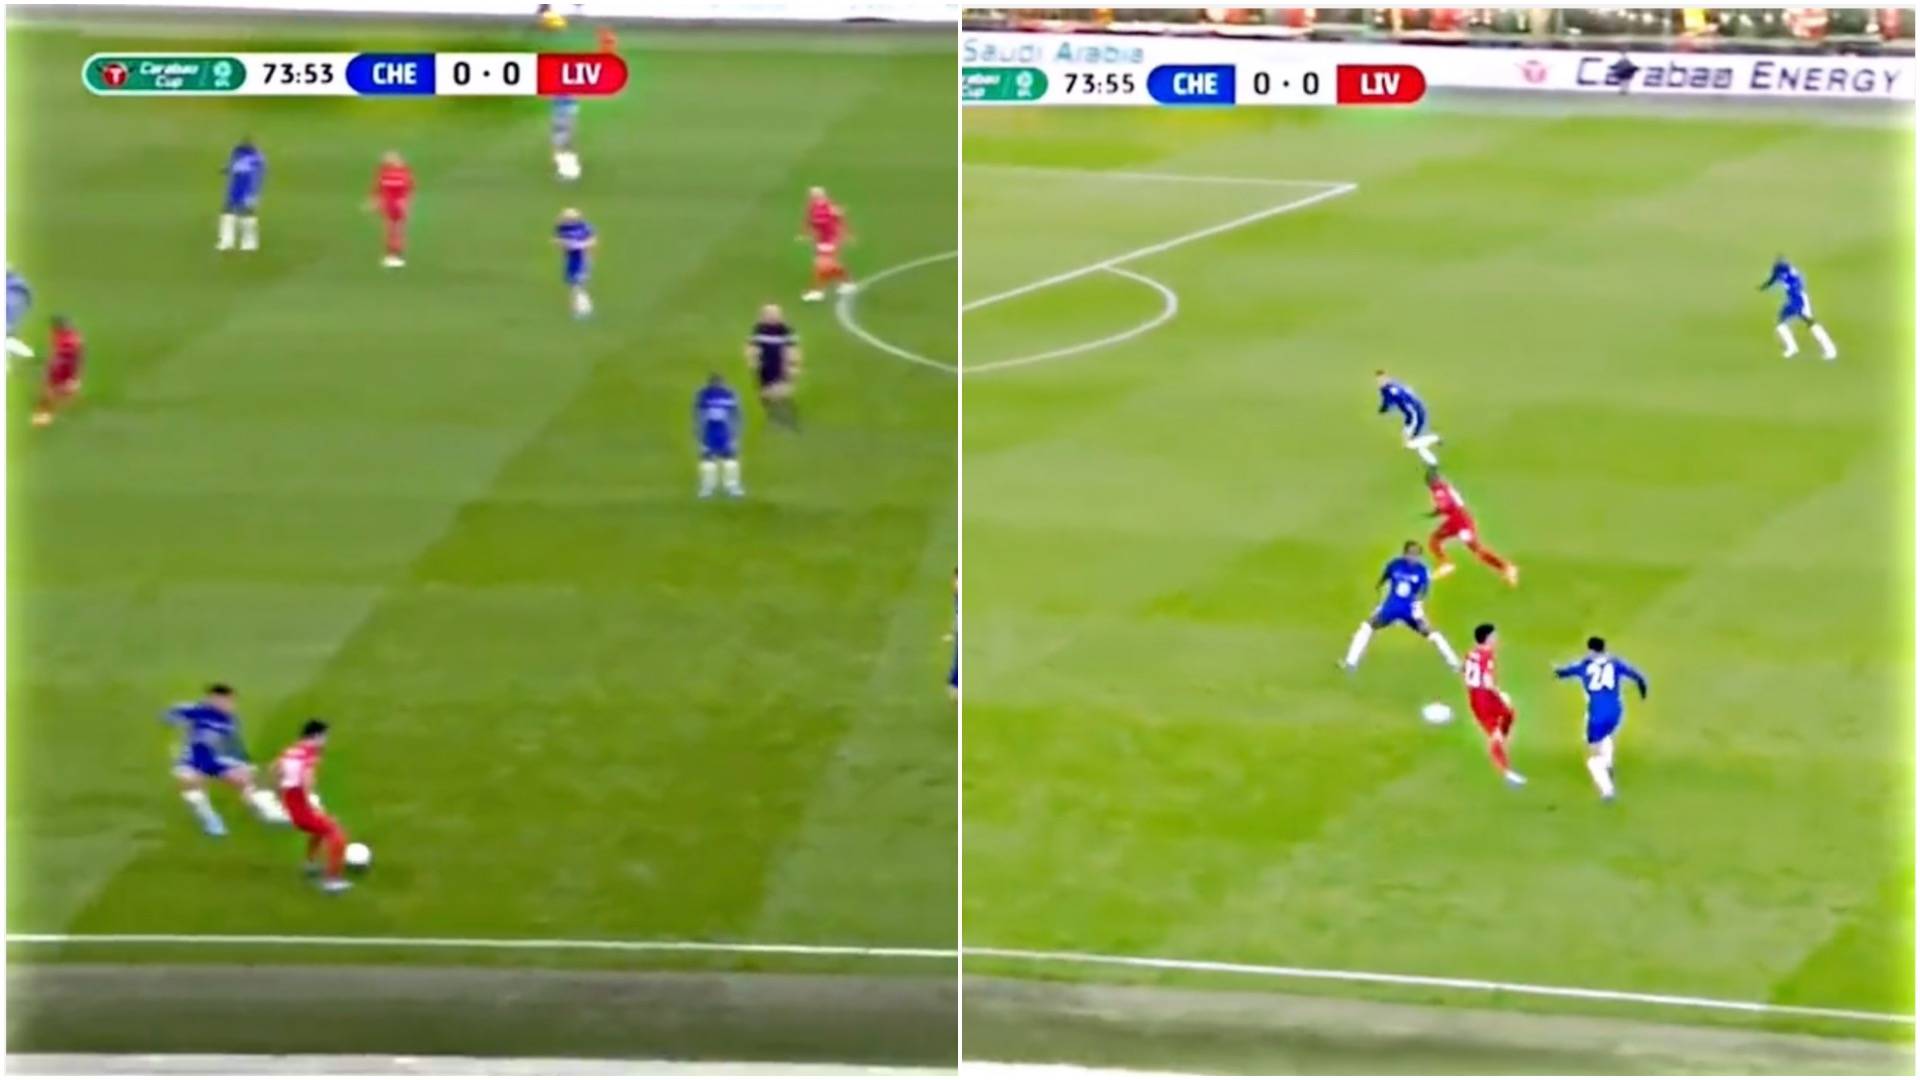 Luis Diaz rinsed Reece James with outrageous touch before audacious no-look pass